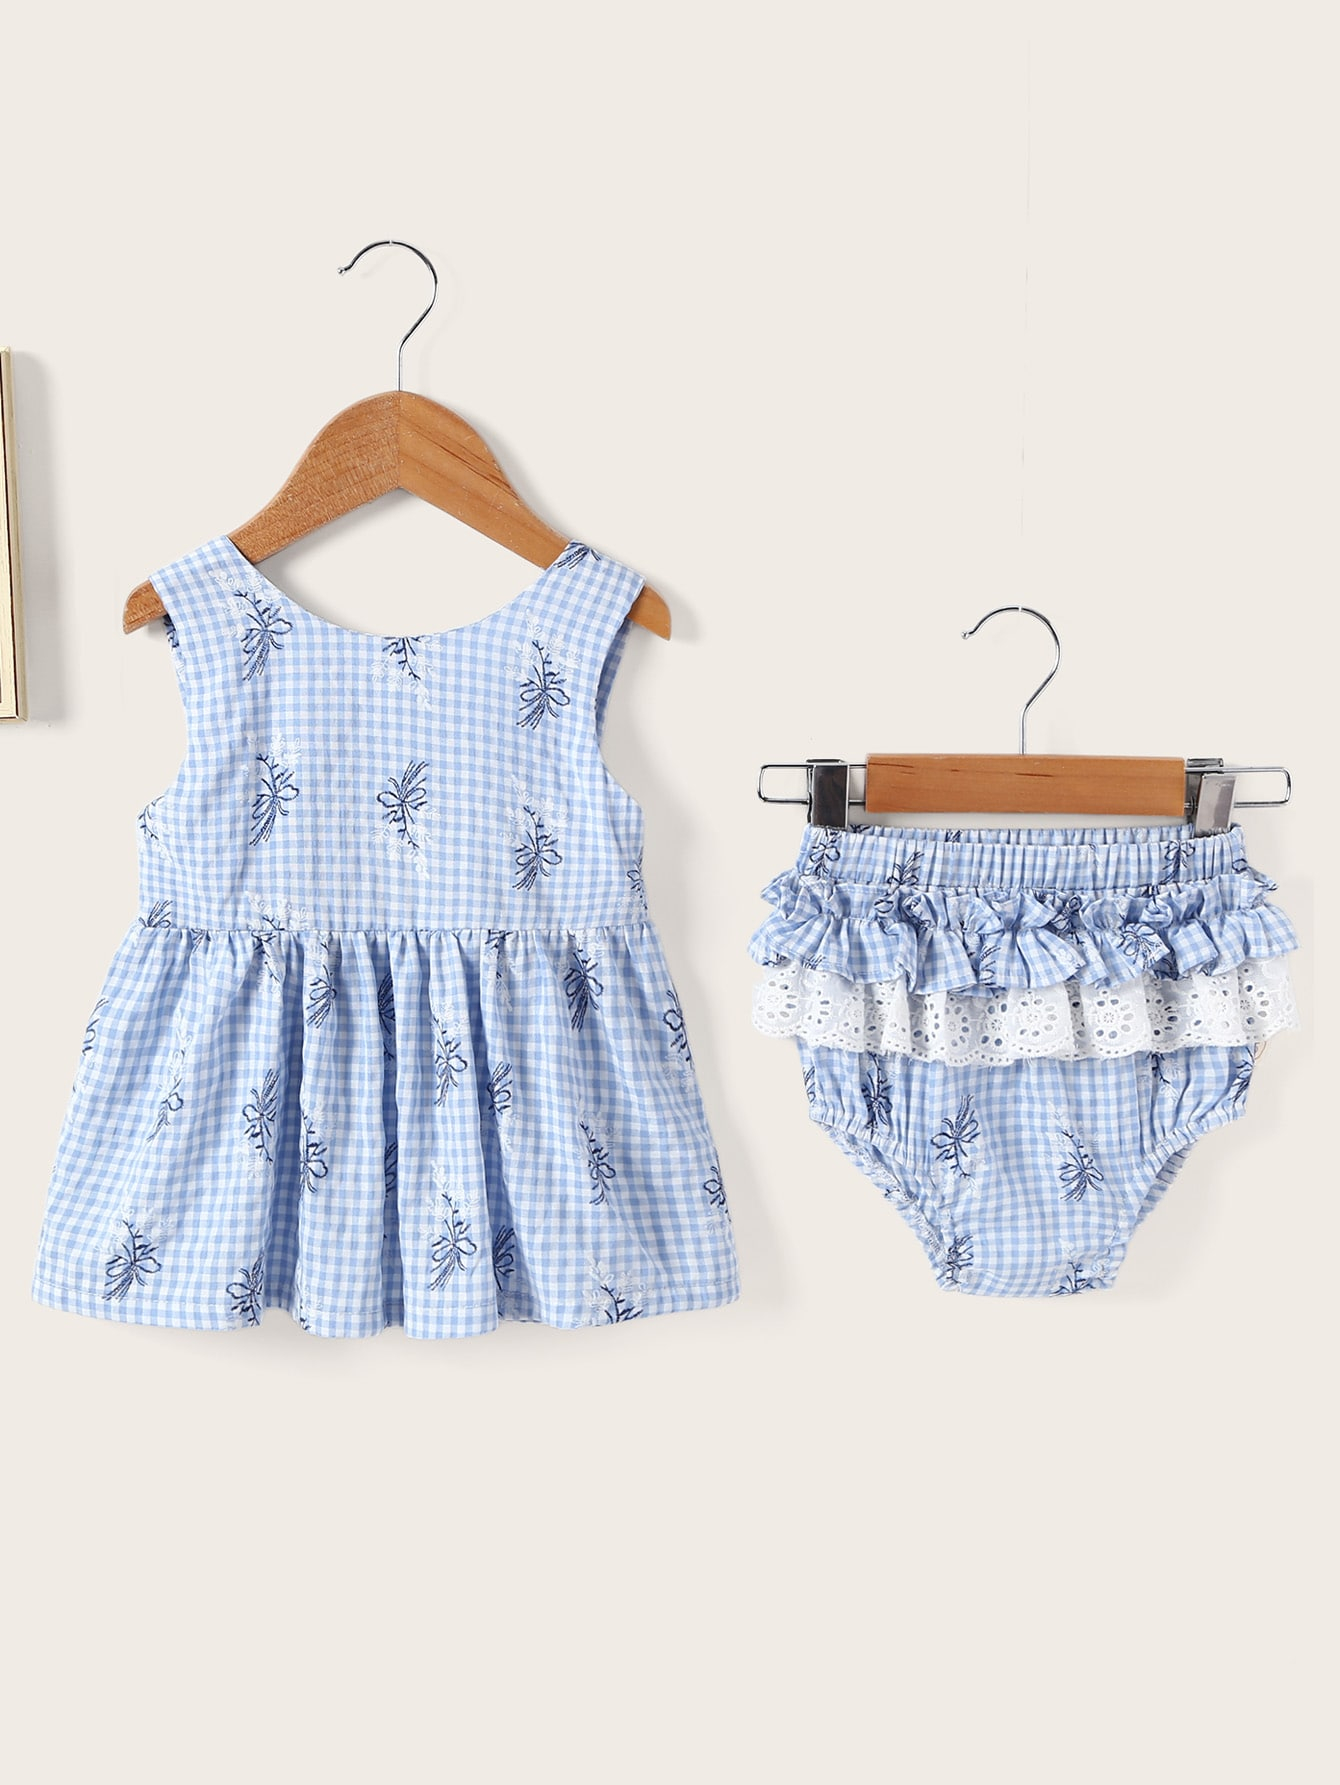 Gingham Embroidery Patterns Ba Embroidery Gingham Ruffle Dress With Shorts